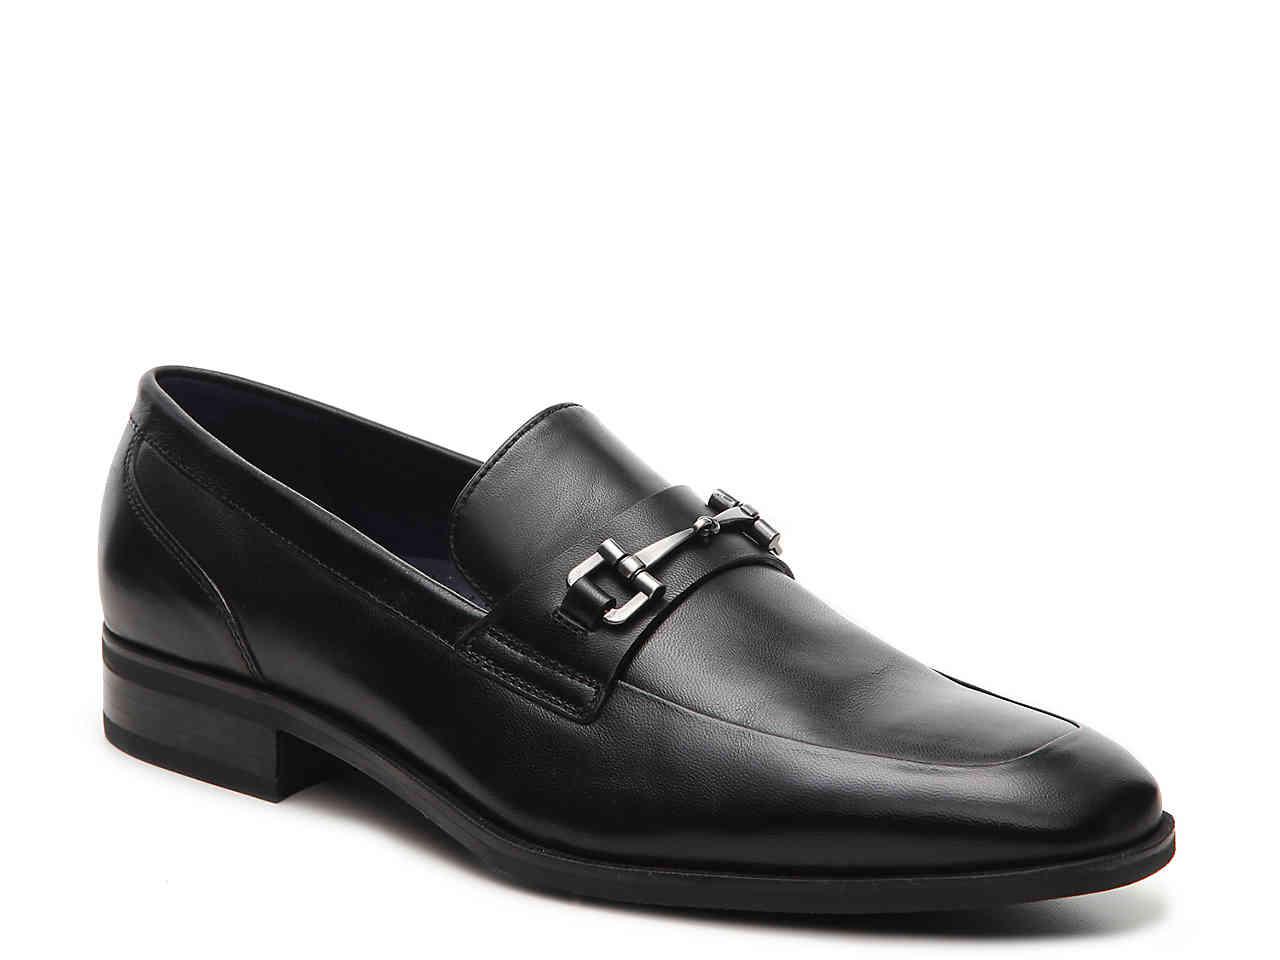 Cole Haan Leather Martino Loafer in Black for Men - Lyst